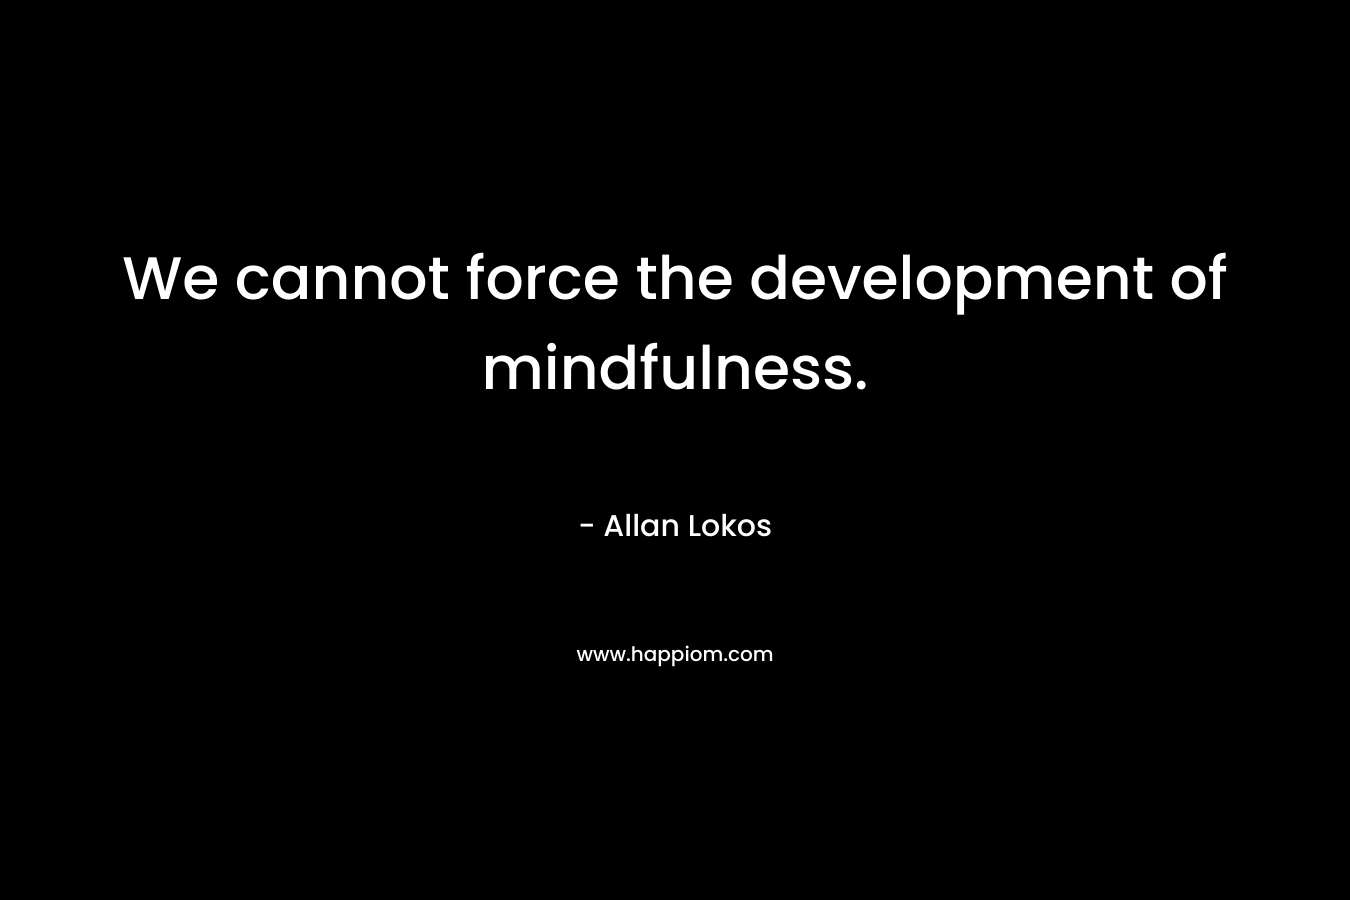 We cannot force the development of mindfulness. – Allan Lokos